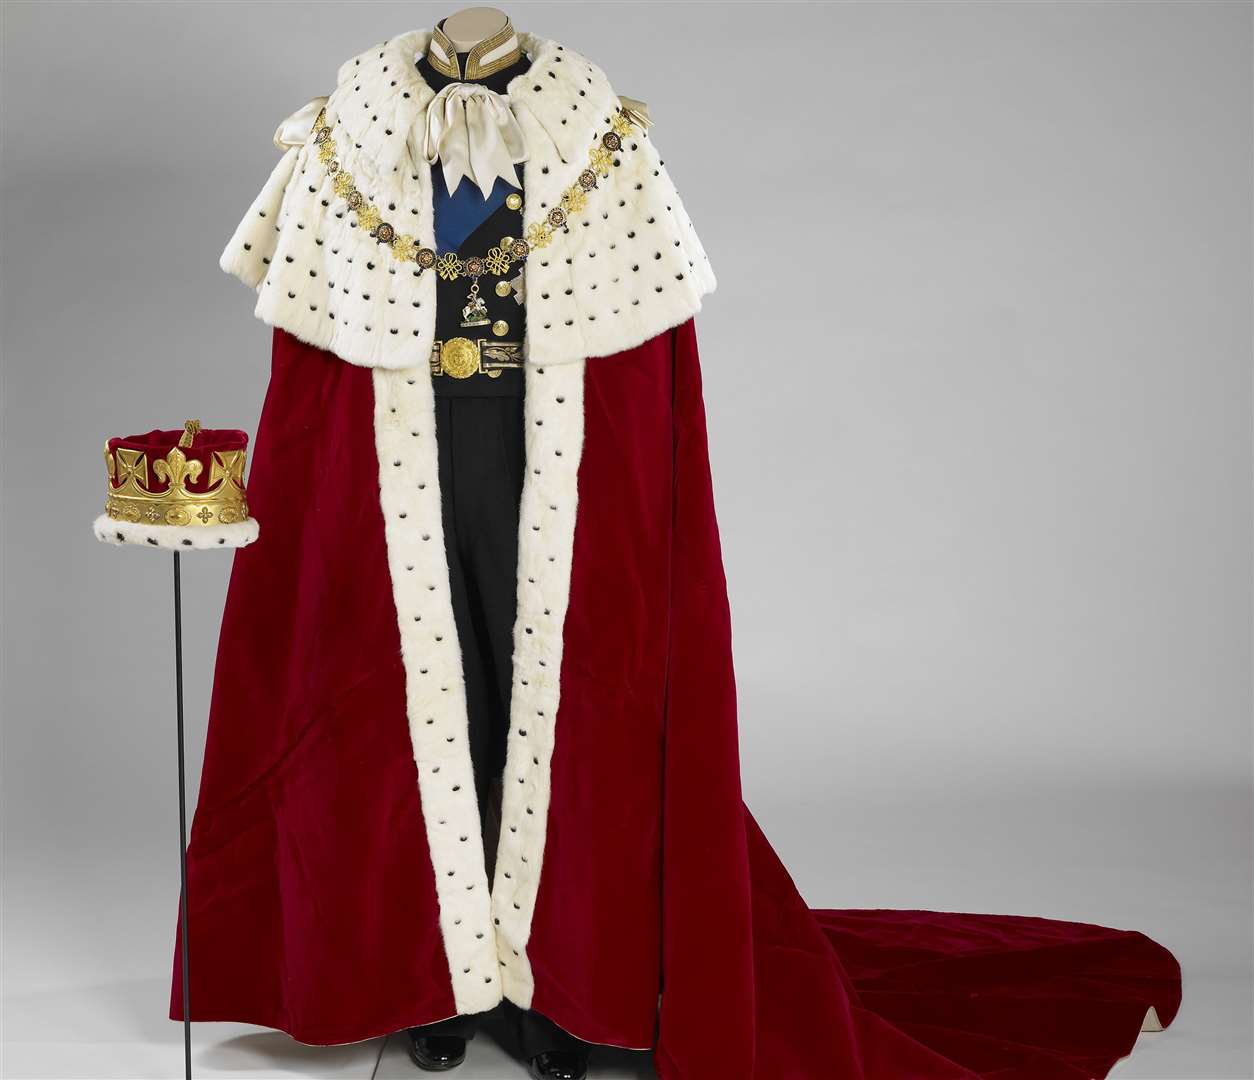 Items the Duke of Edinburgh wore for the Coronation will be part of the display. Picture courtesy of: Royal Collection Trust / © Her Majesty Queen Elizabeth II 2021